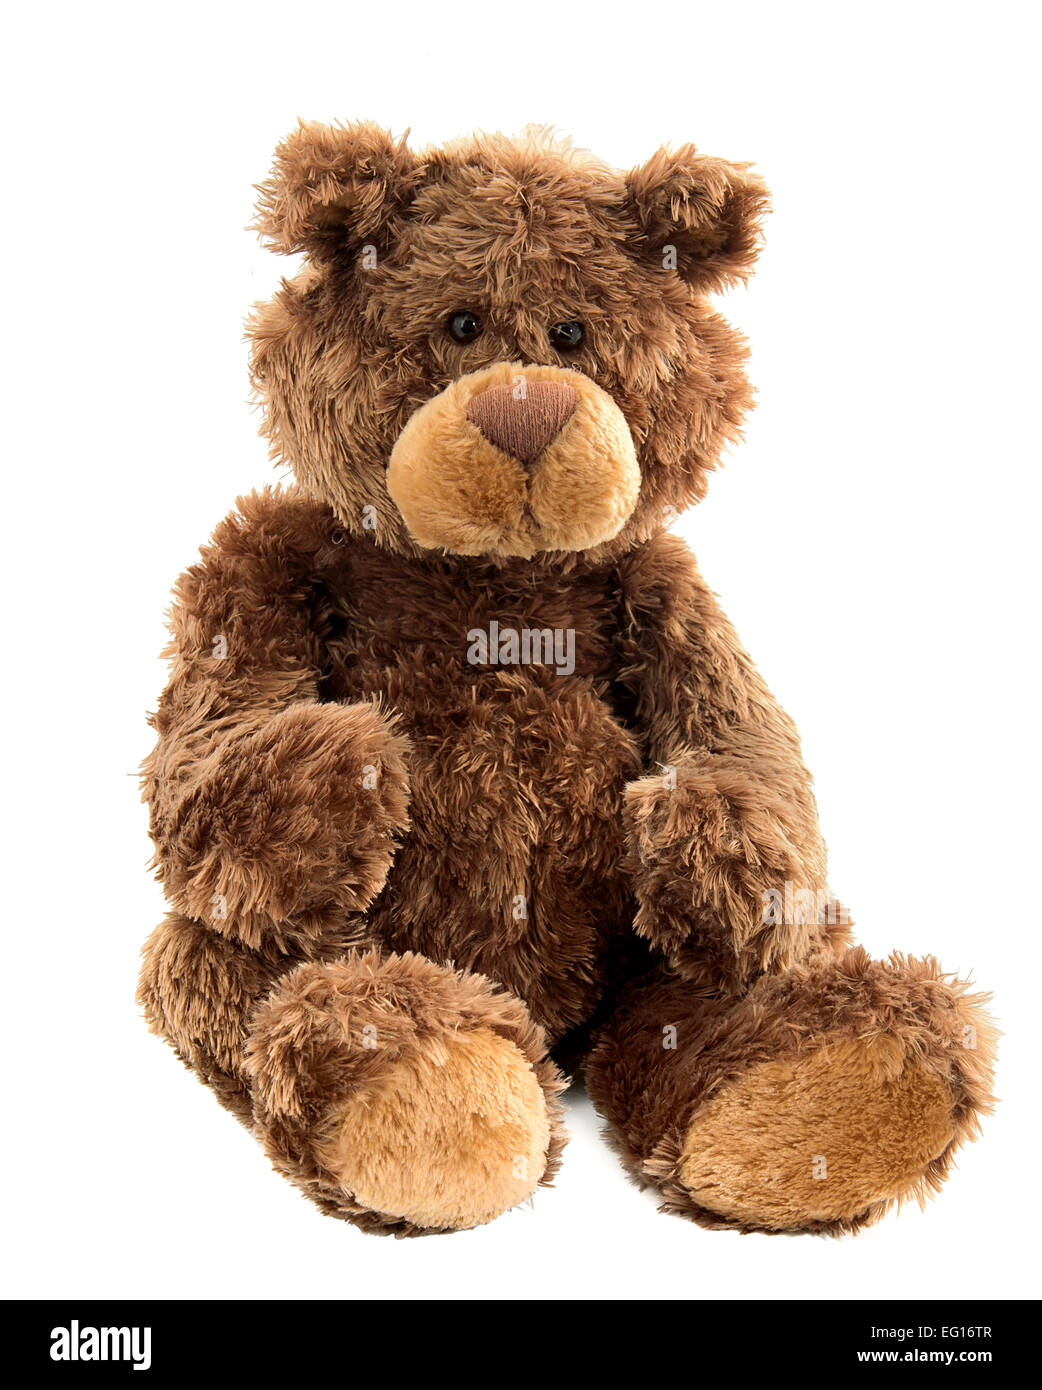 cut out image of soft teddy bear toy Stock Photo